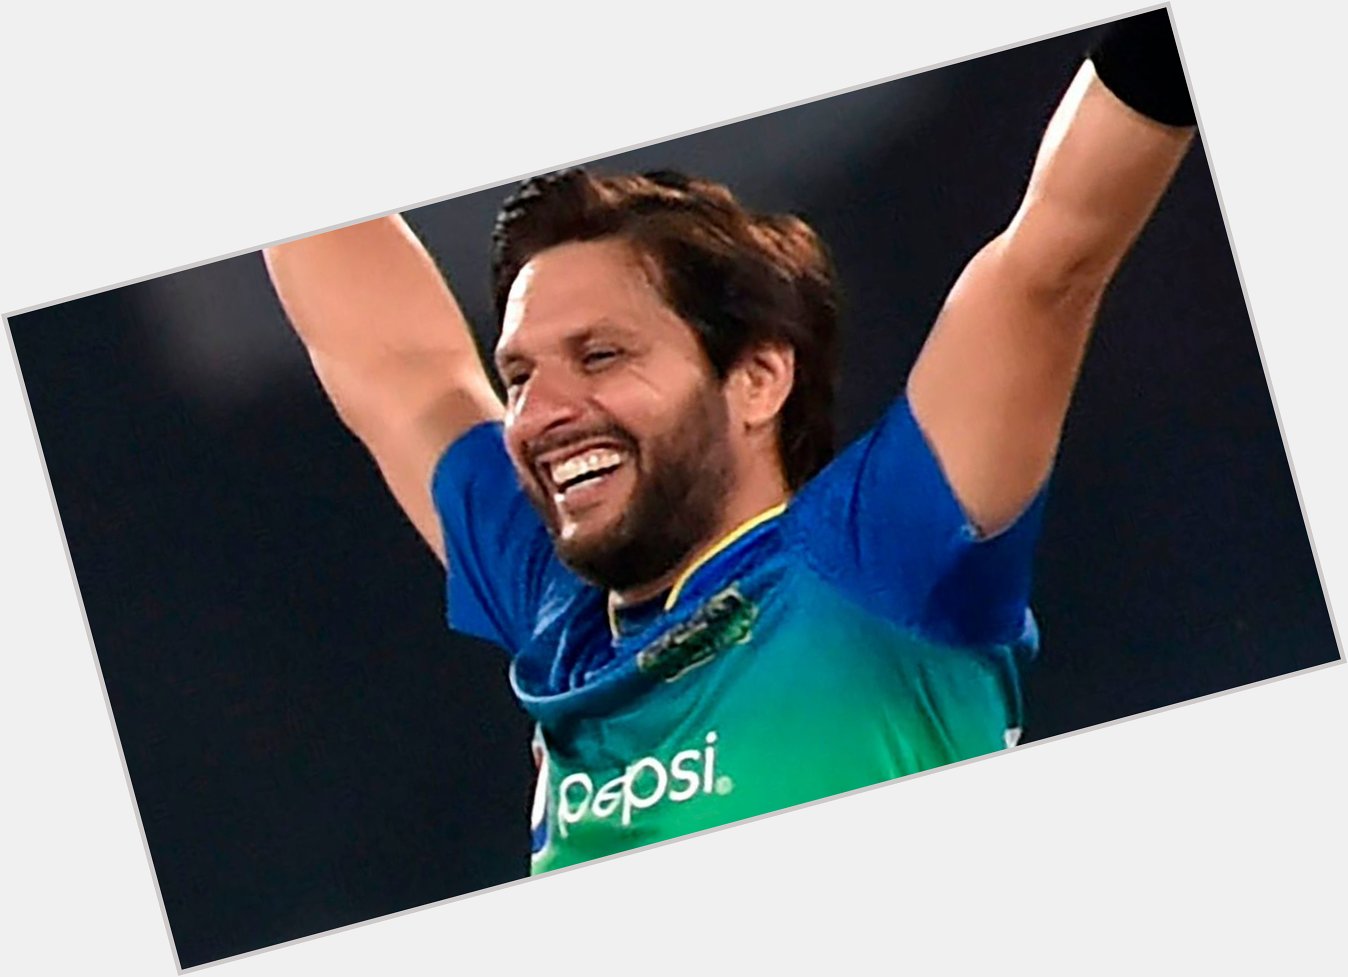 Happy Birthday Shahid Afridi: Wishes pour in for Boom Boom on message as he turns 44  